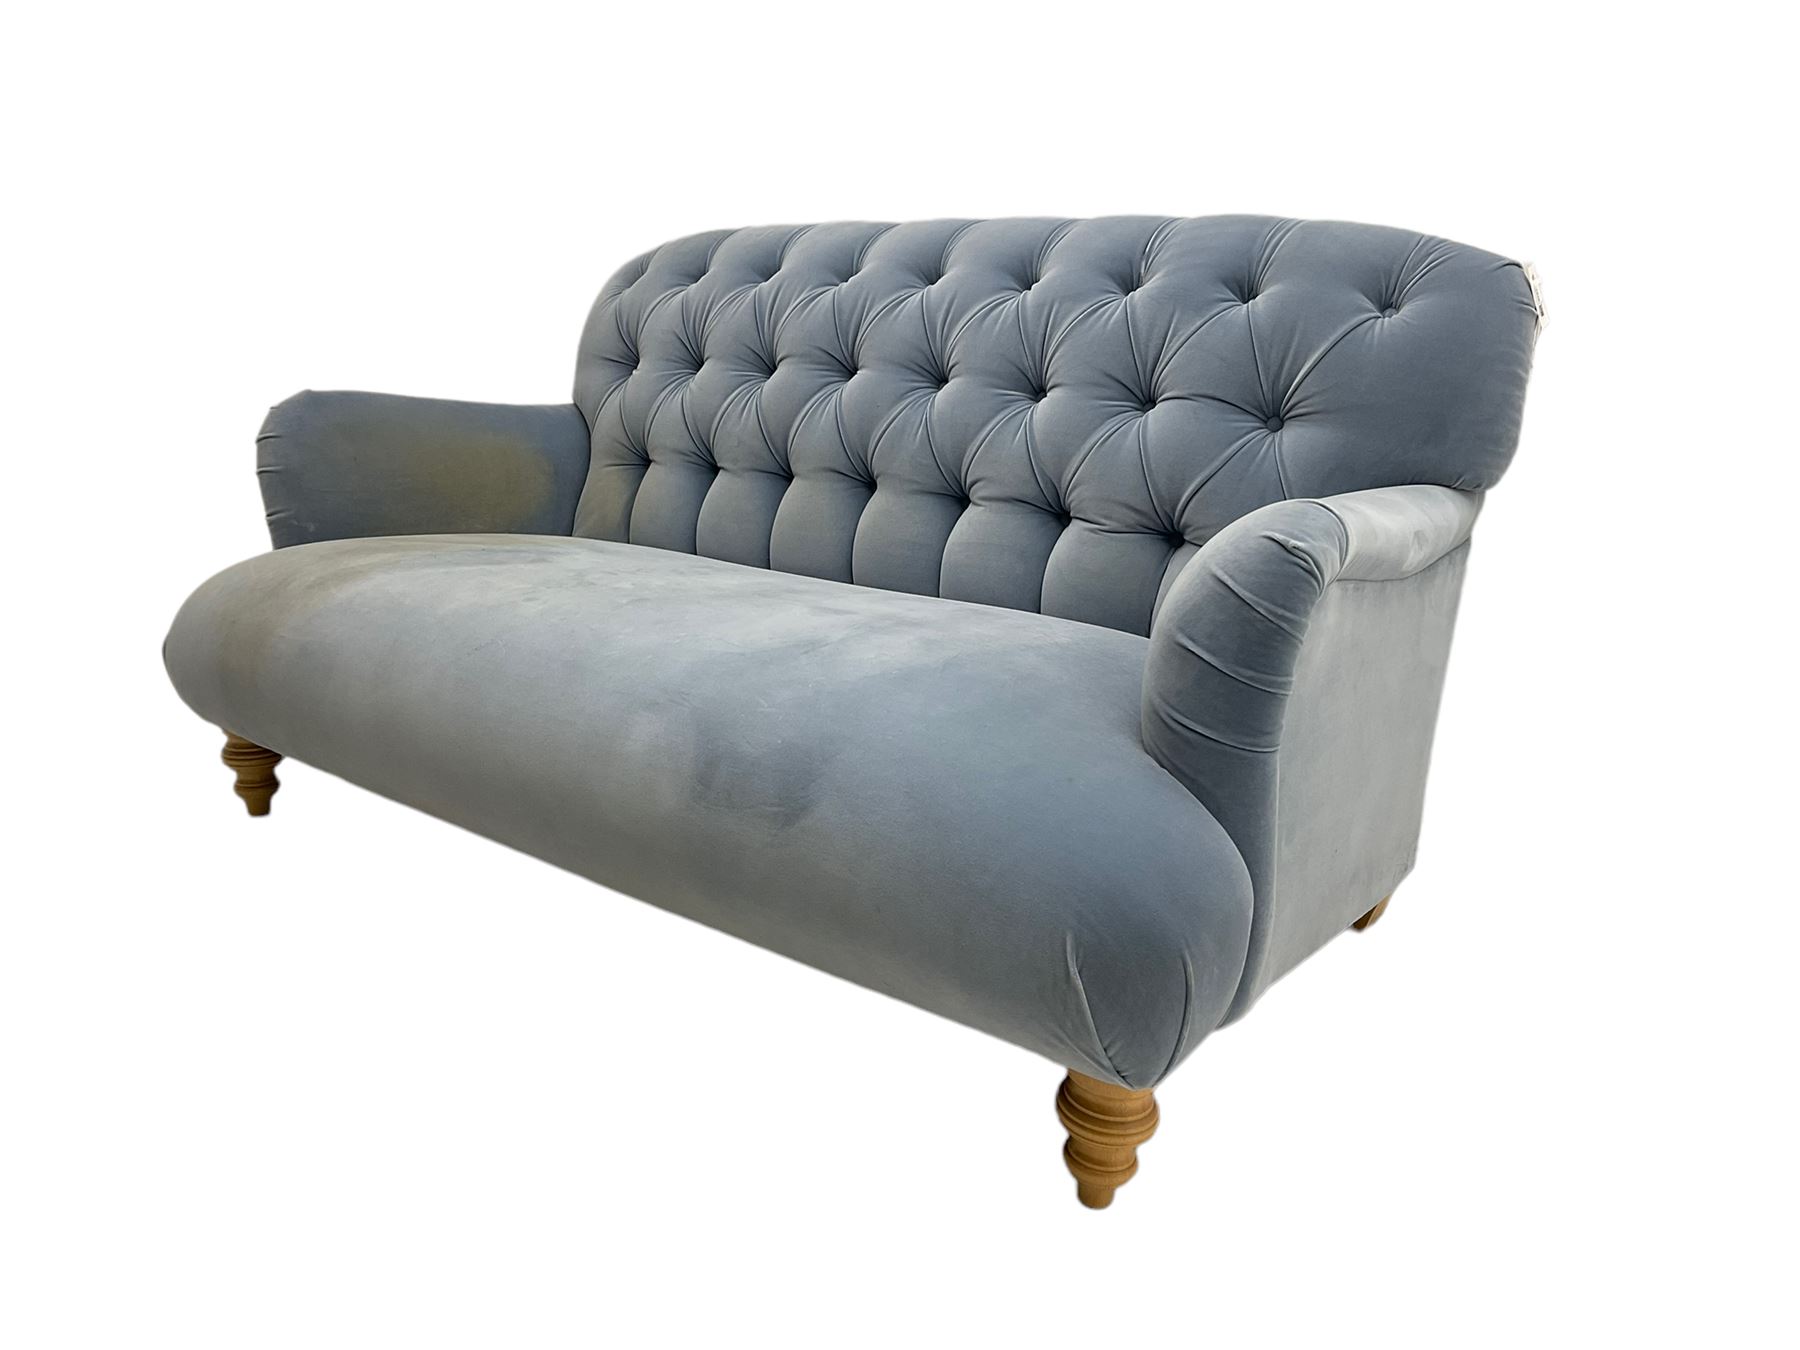 Tetrad - two seat sofa upholstered in baby blue buttoned fabric - Image 2 of 6